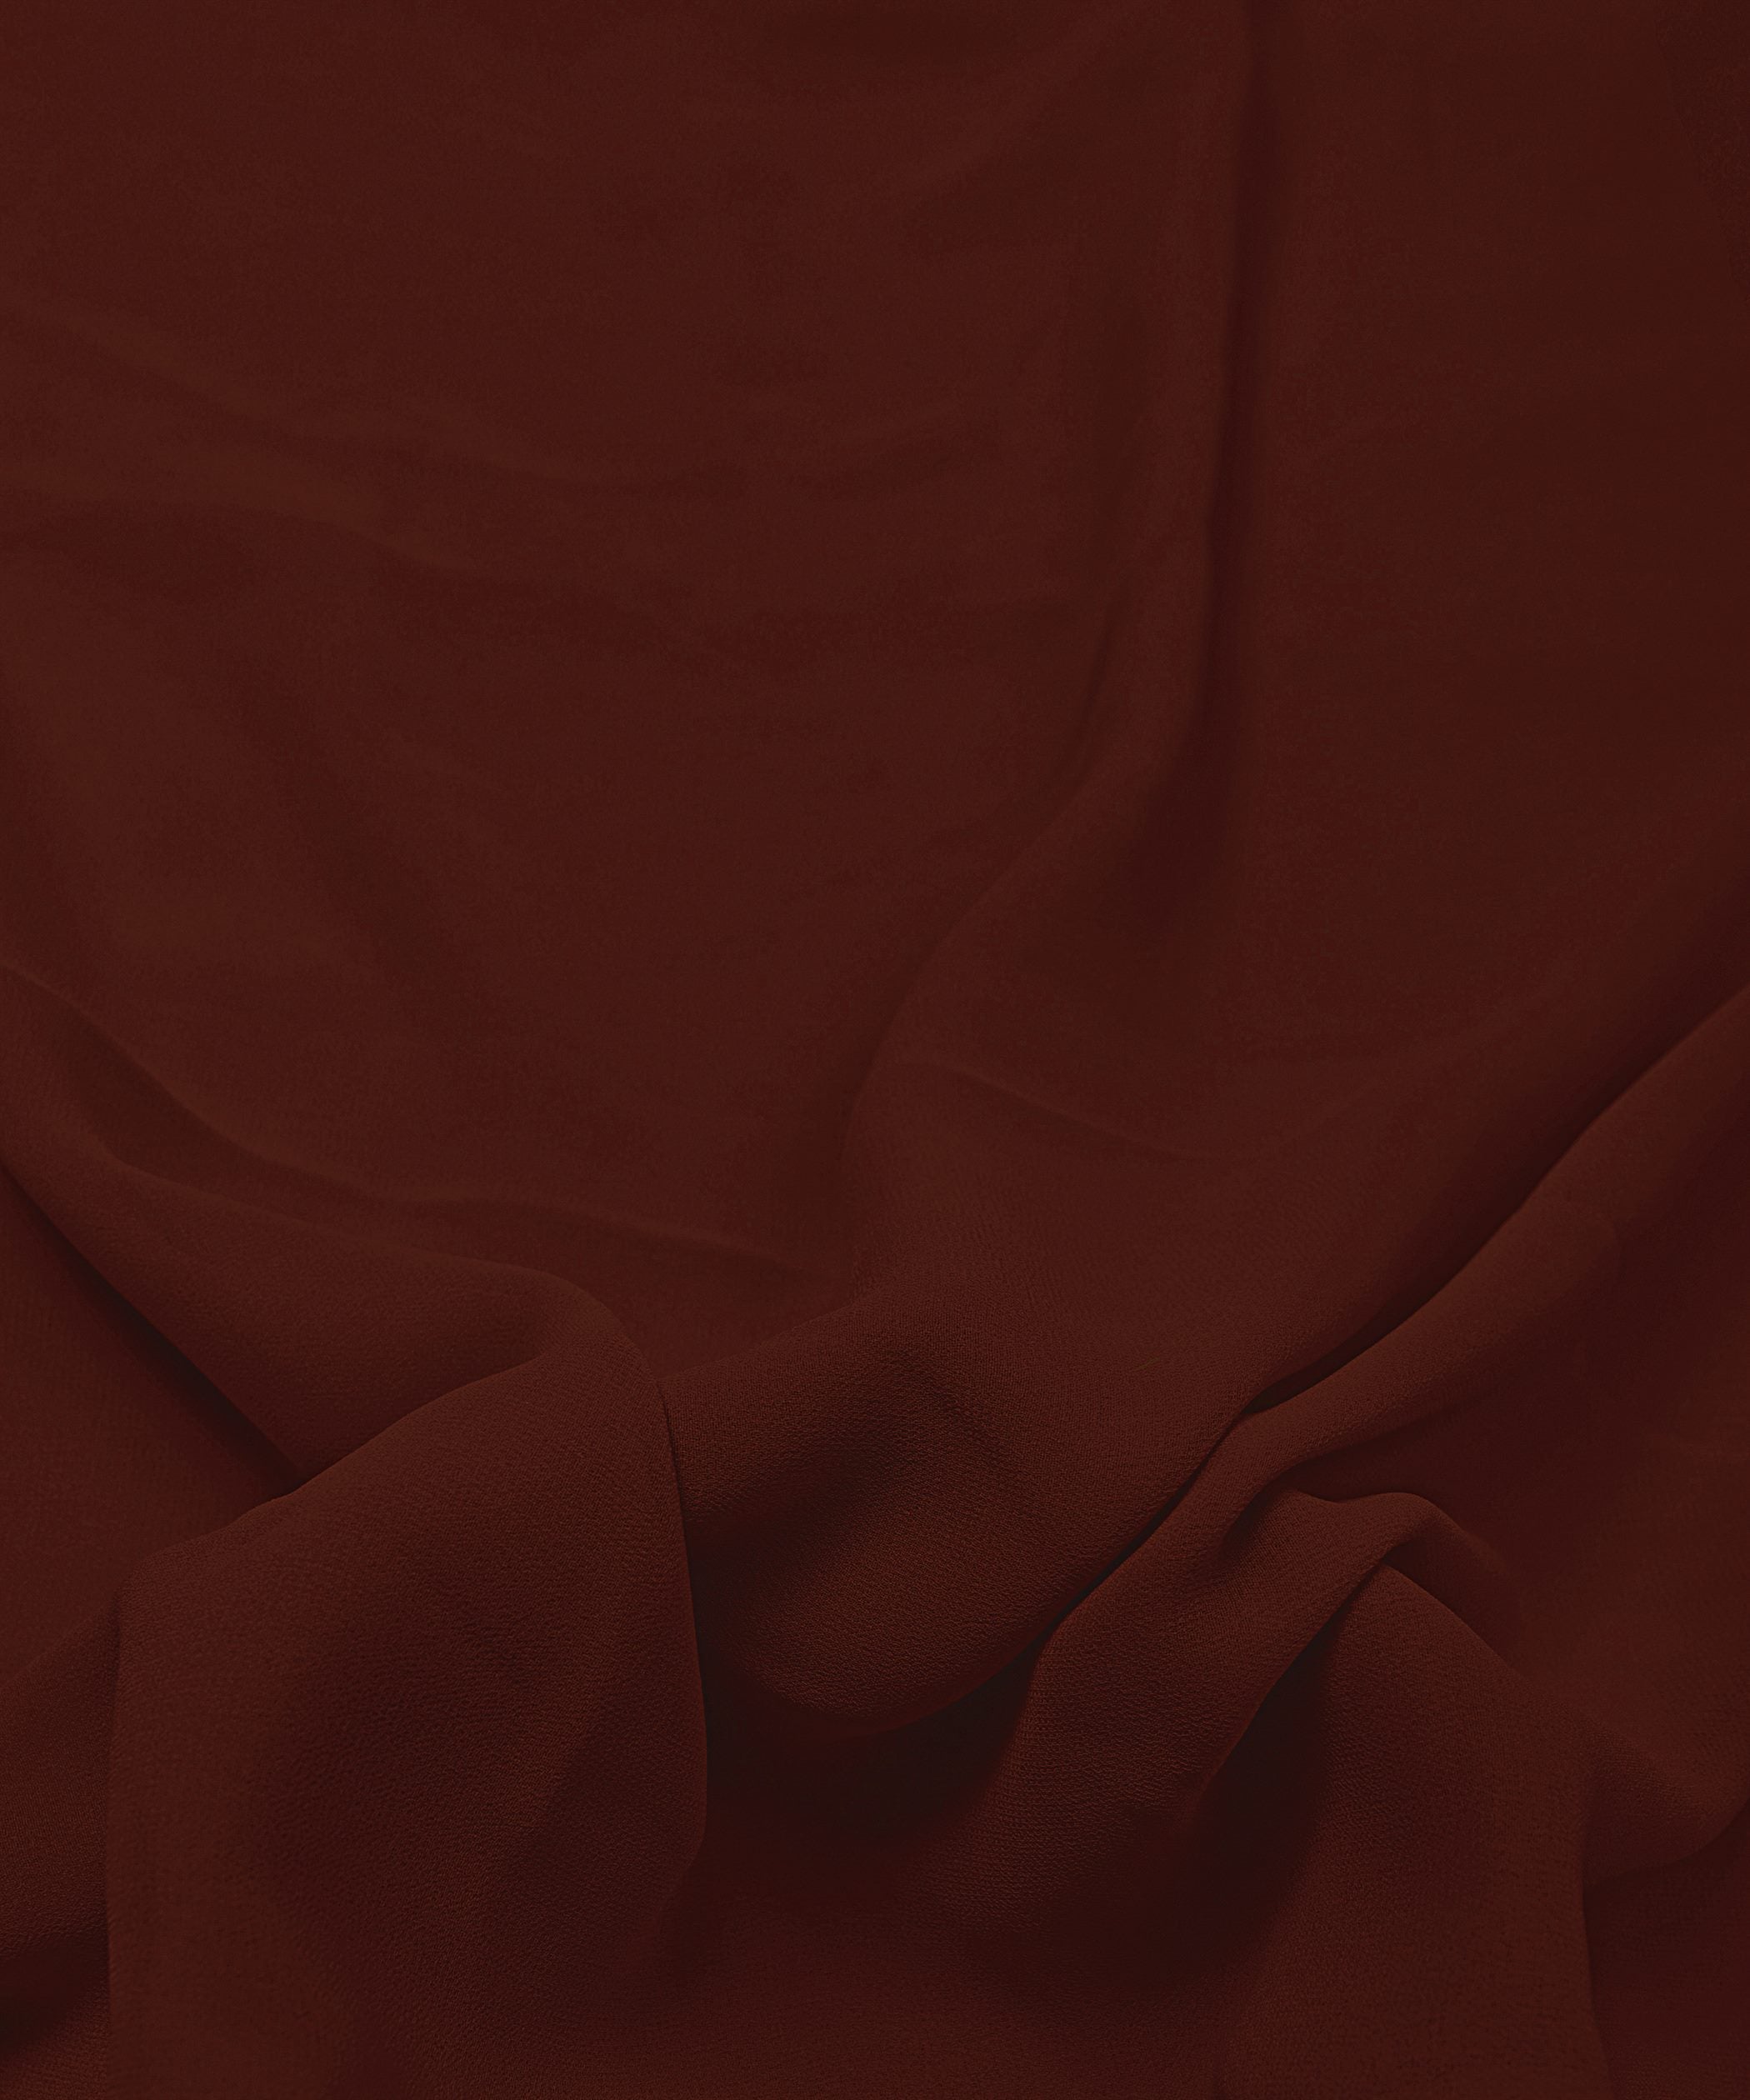 Cationic Dark Coffee Plain Dyed Georgette (60 Grams) Fabric